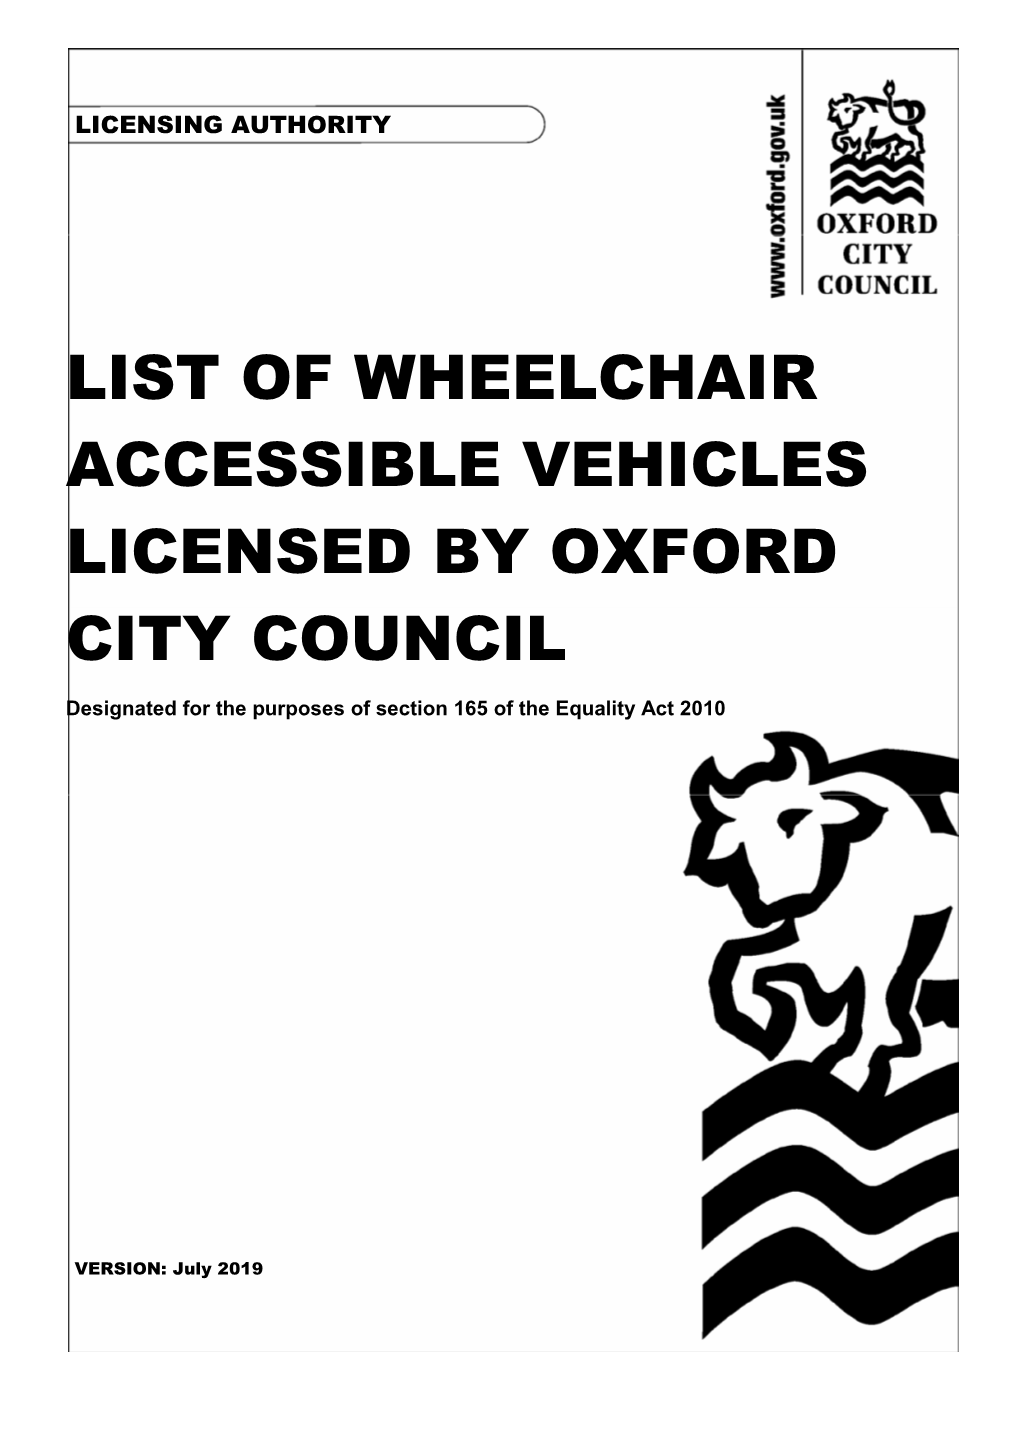 List of Wheelchair Accessible Vehicles Licensed by Oxford City Council